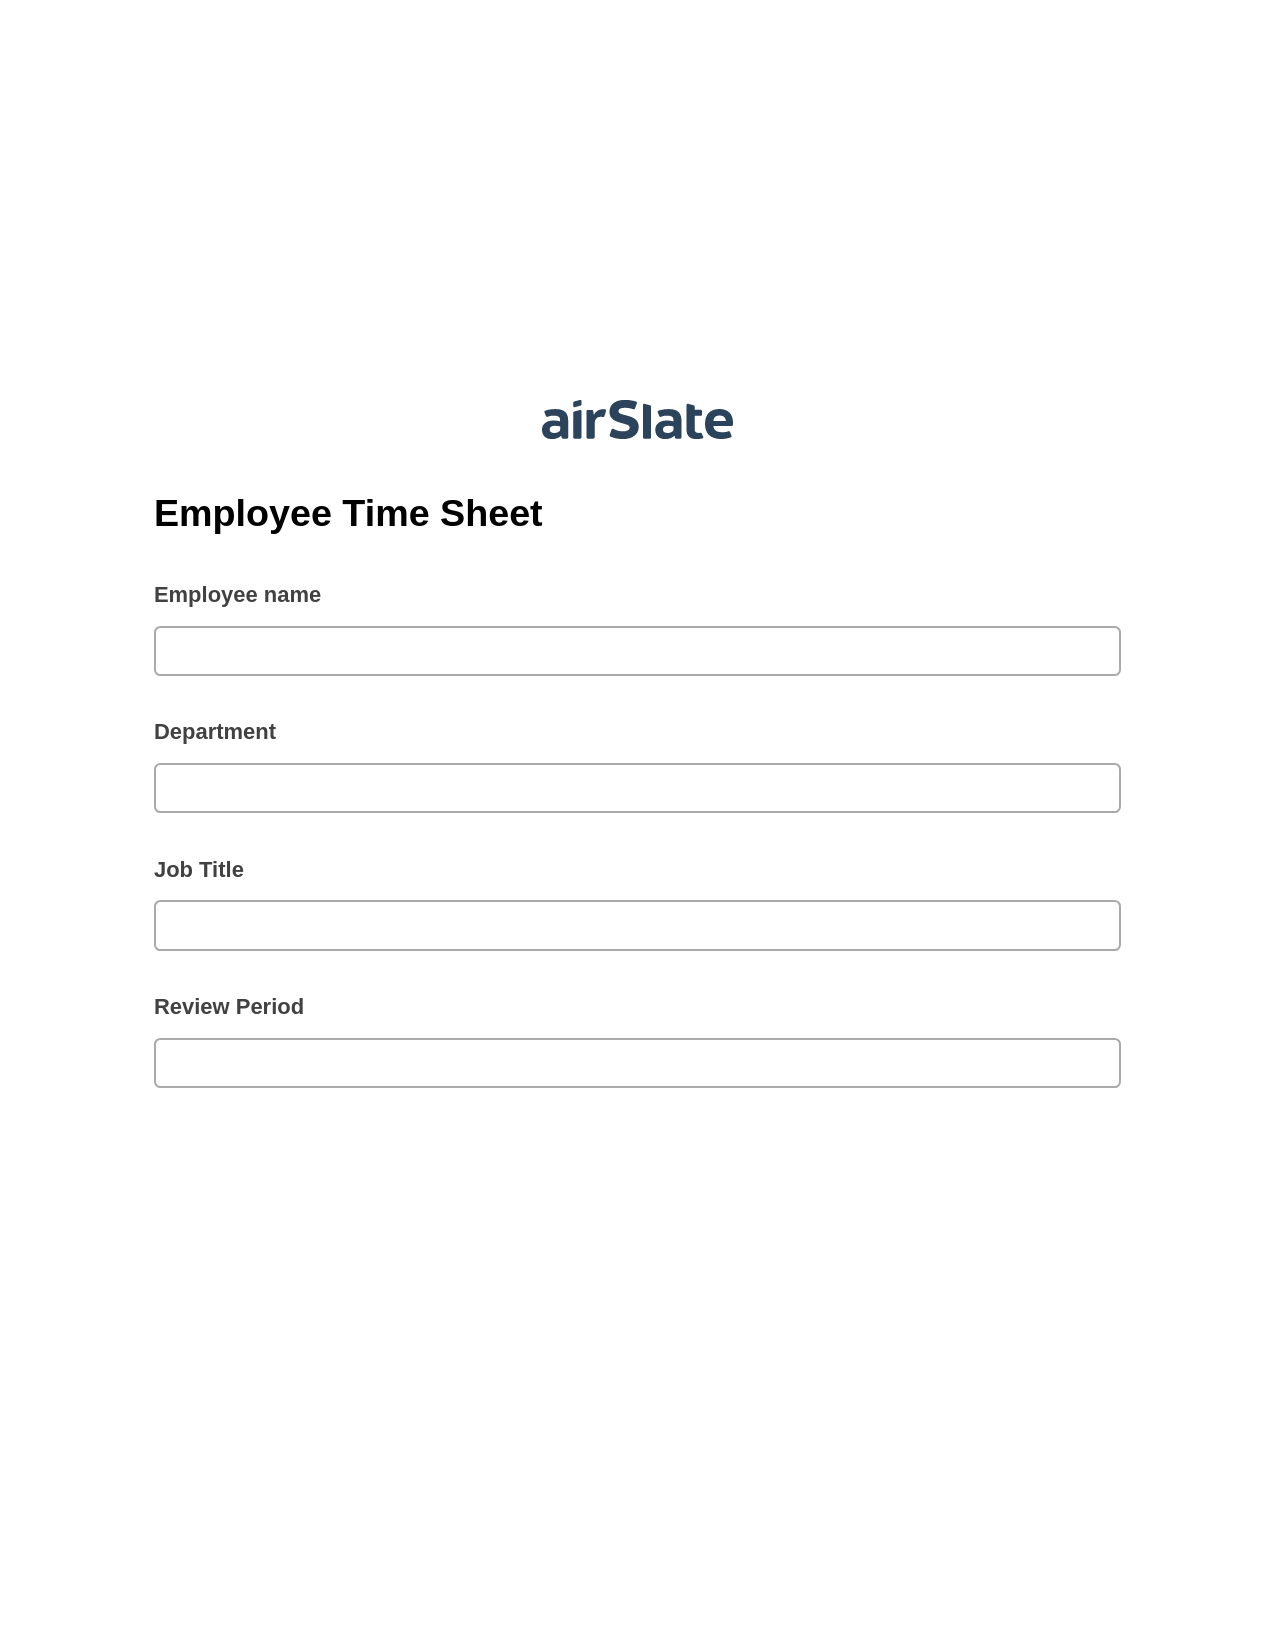 Employee Time Sheet Pre-fill Dropdowns from Excel Bot, Update Audit Trail Bot, Archive to Box Bot